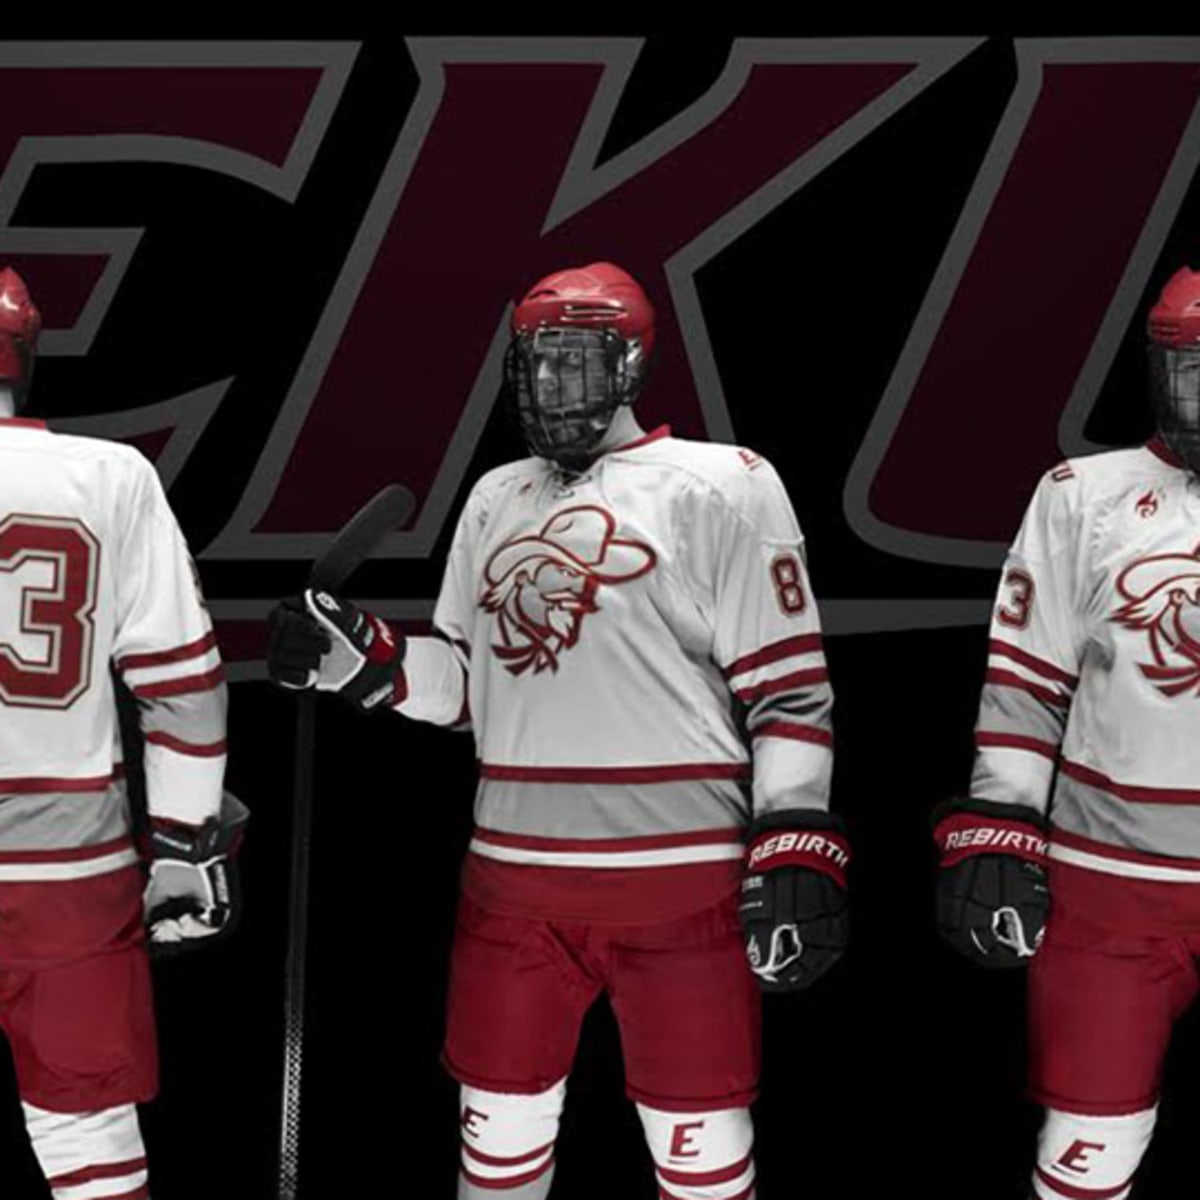 What do you think of our club's unis? : r/EASHL